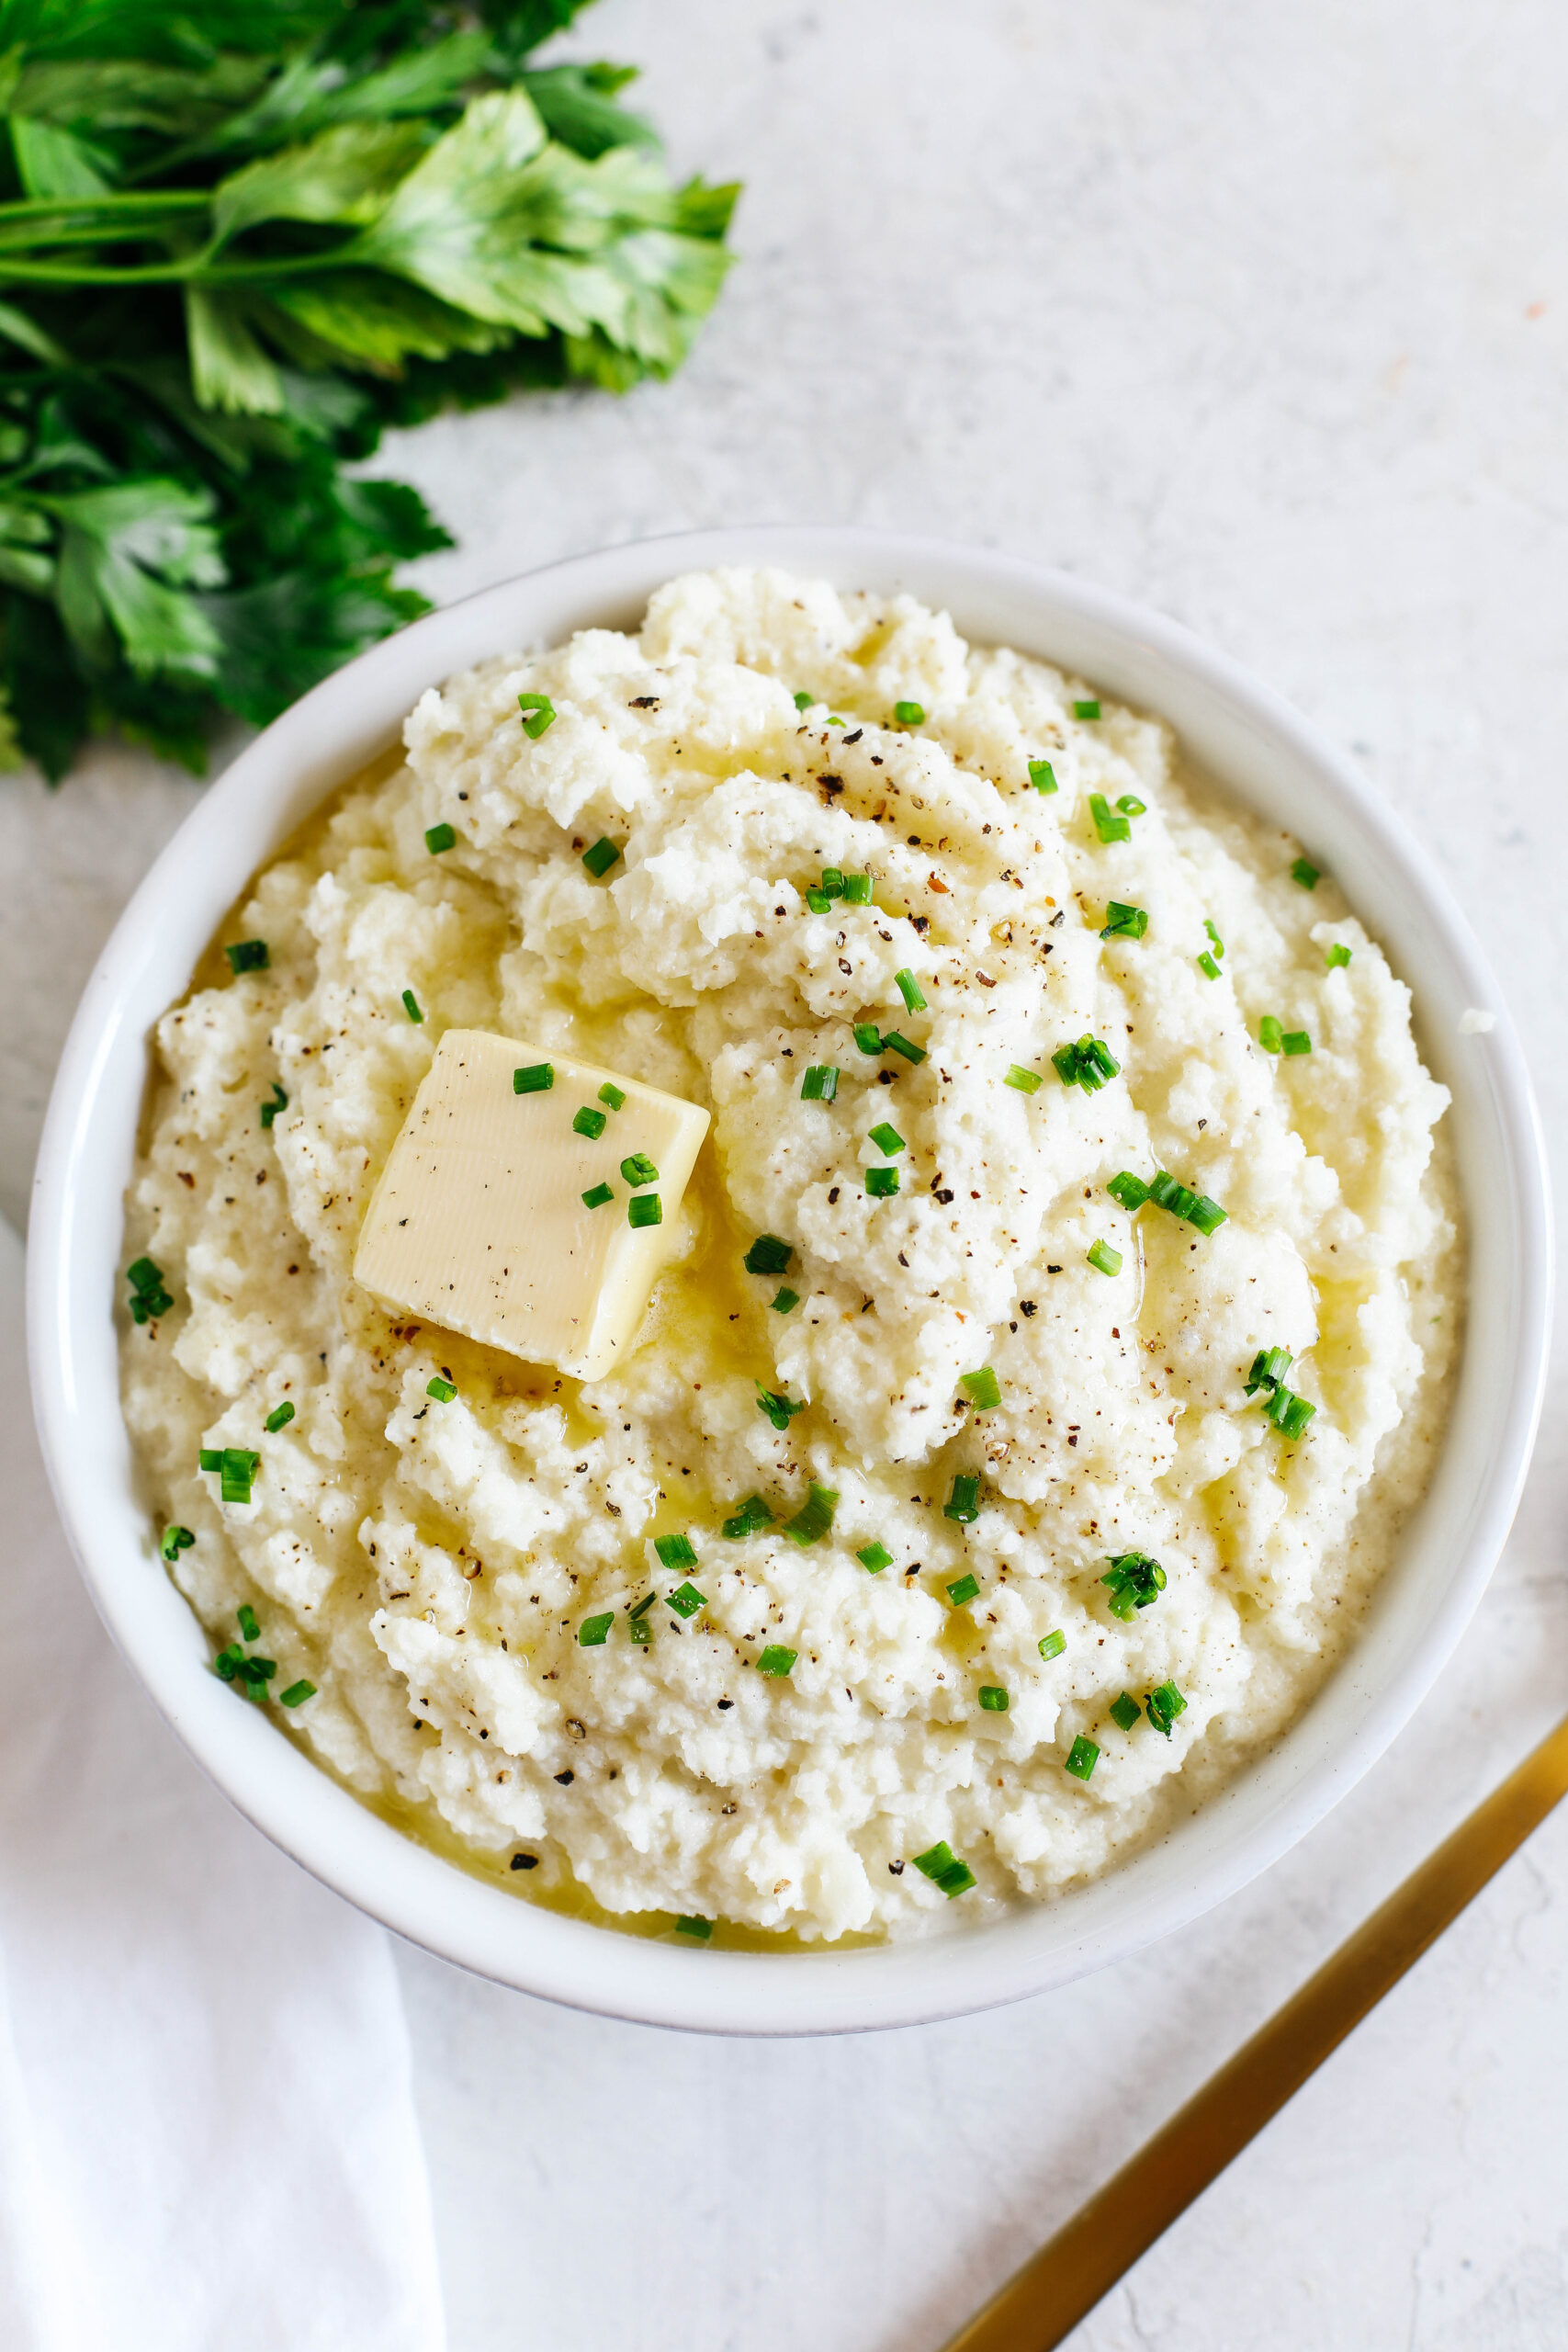 This EASY Mashed Cauliflower is creamy, delicious, and makes the perfect low carb, keto-friendly side dish easily made in under 15 minutes! #keto